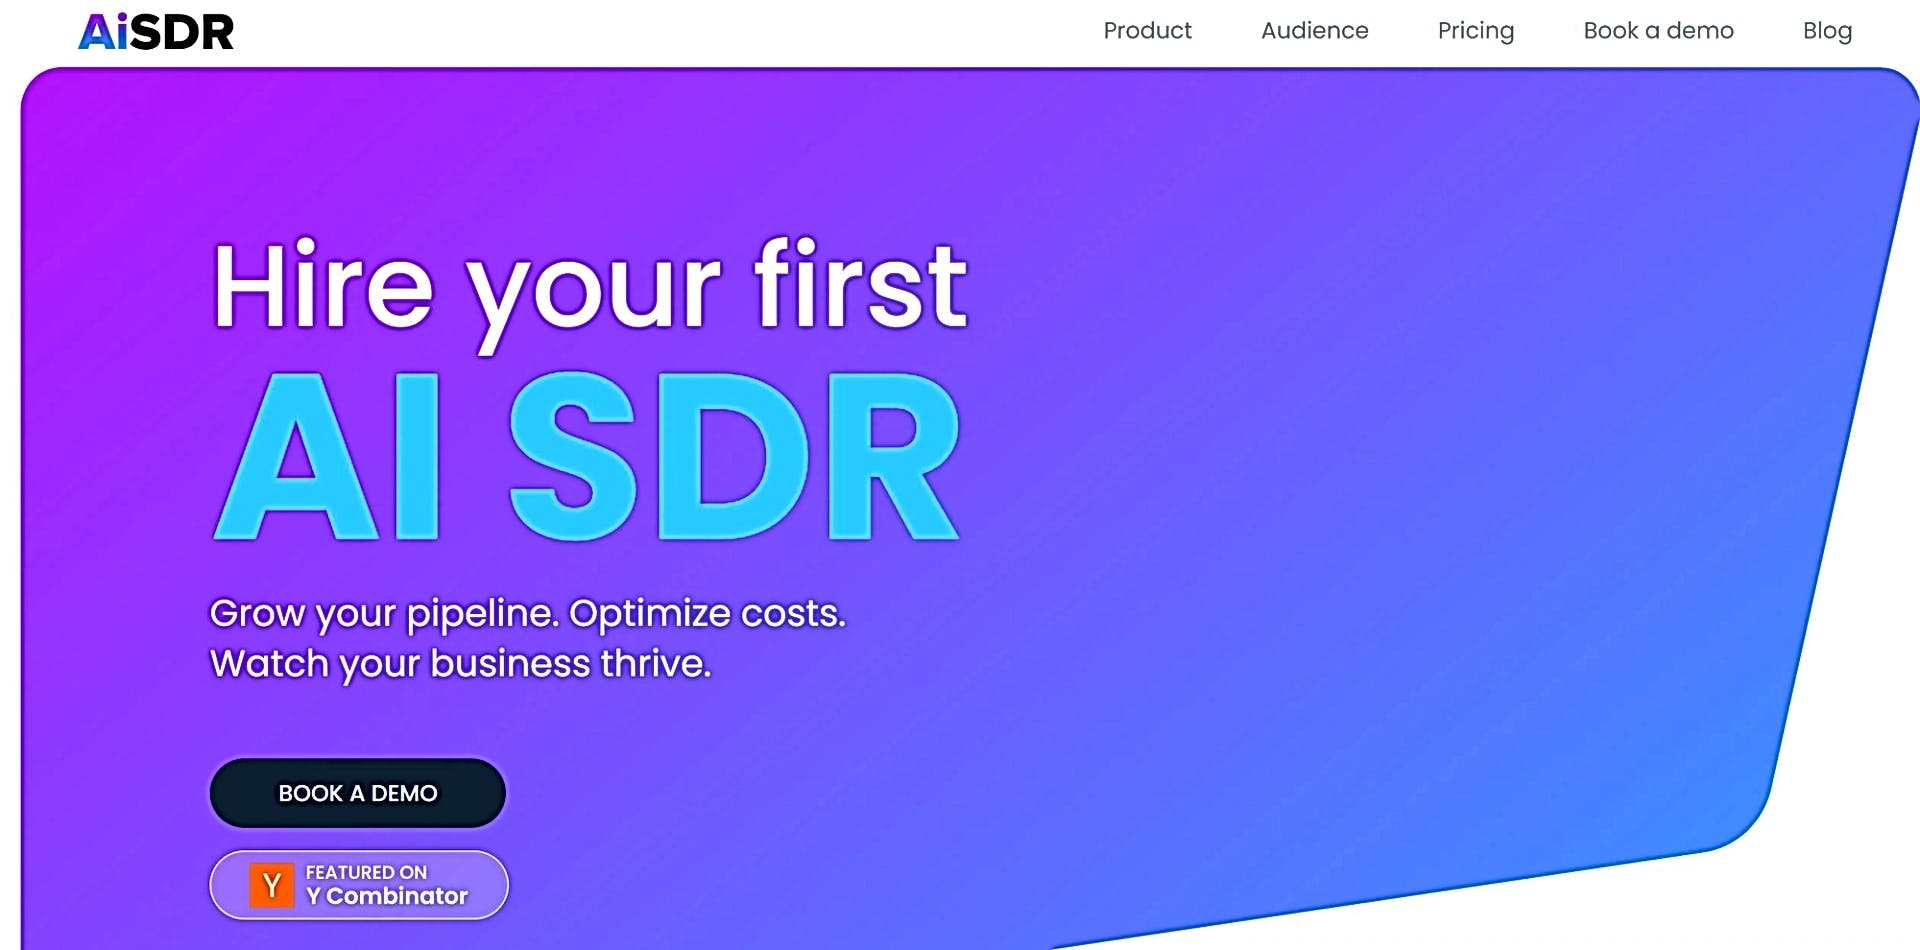 AiSDR featured